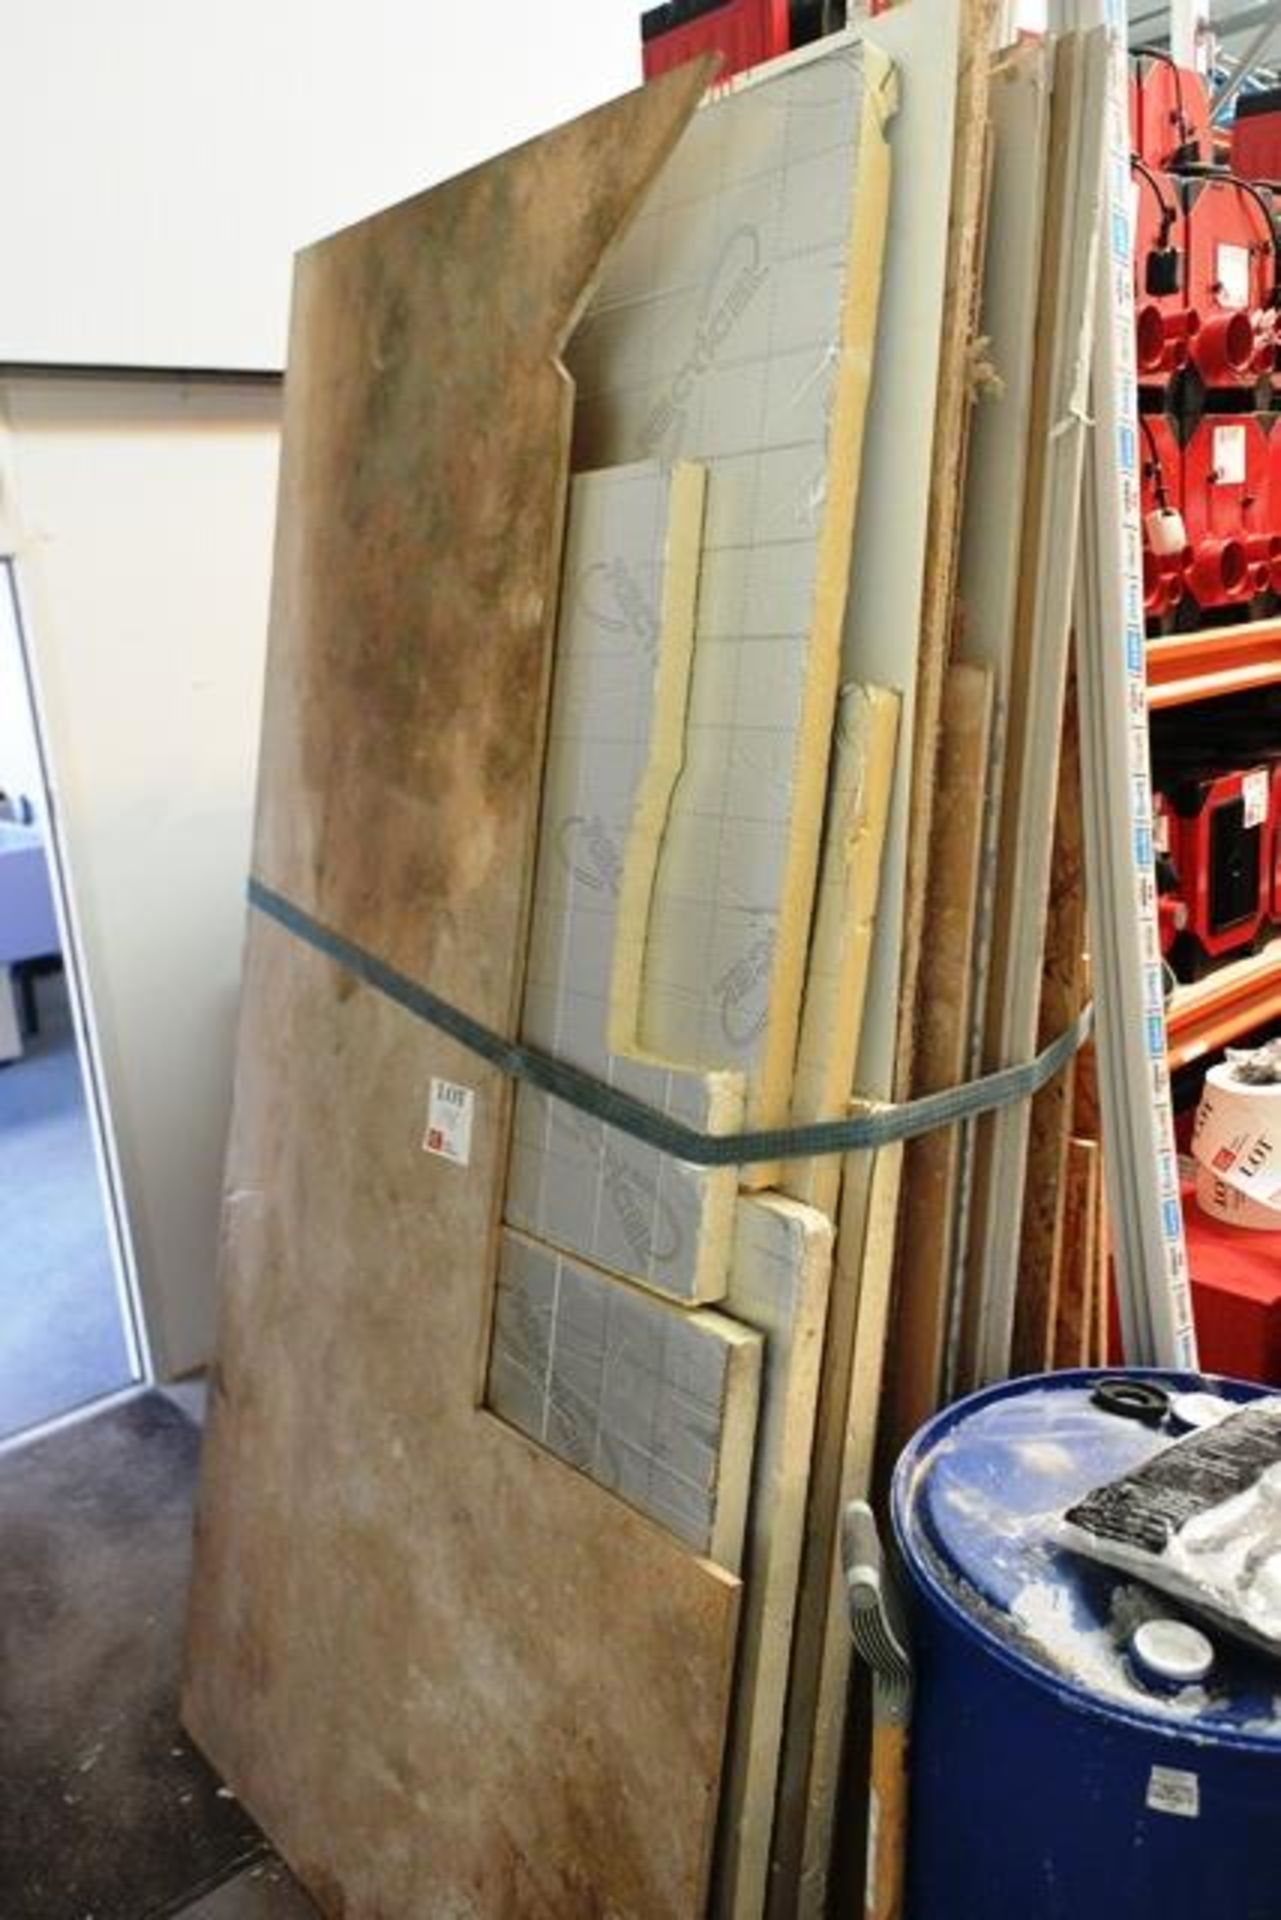 Quantity of various Norbord flooring, untreated timber lengths, chipboard, Recticel insulation, plas